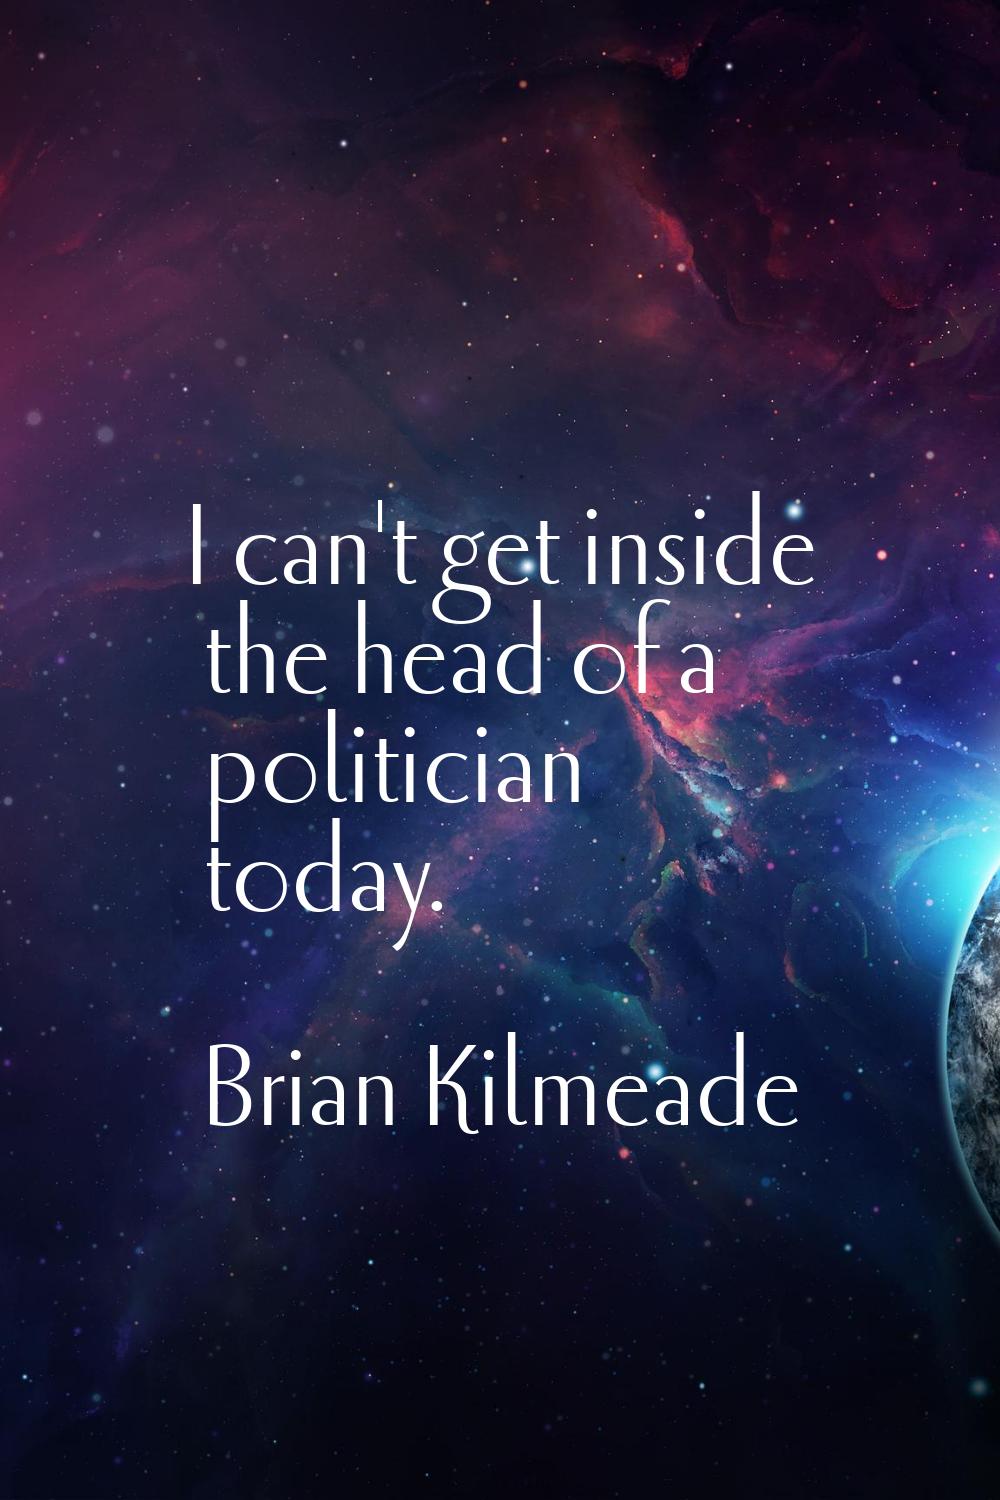 I can't get inside the head of a politician today.